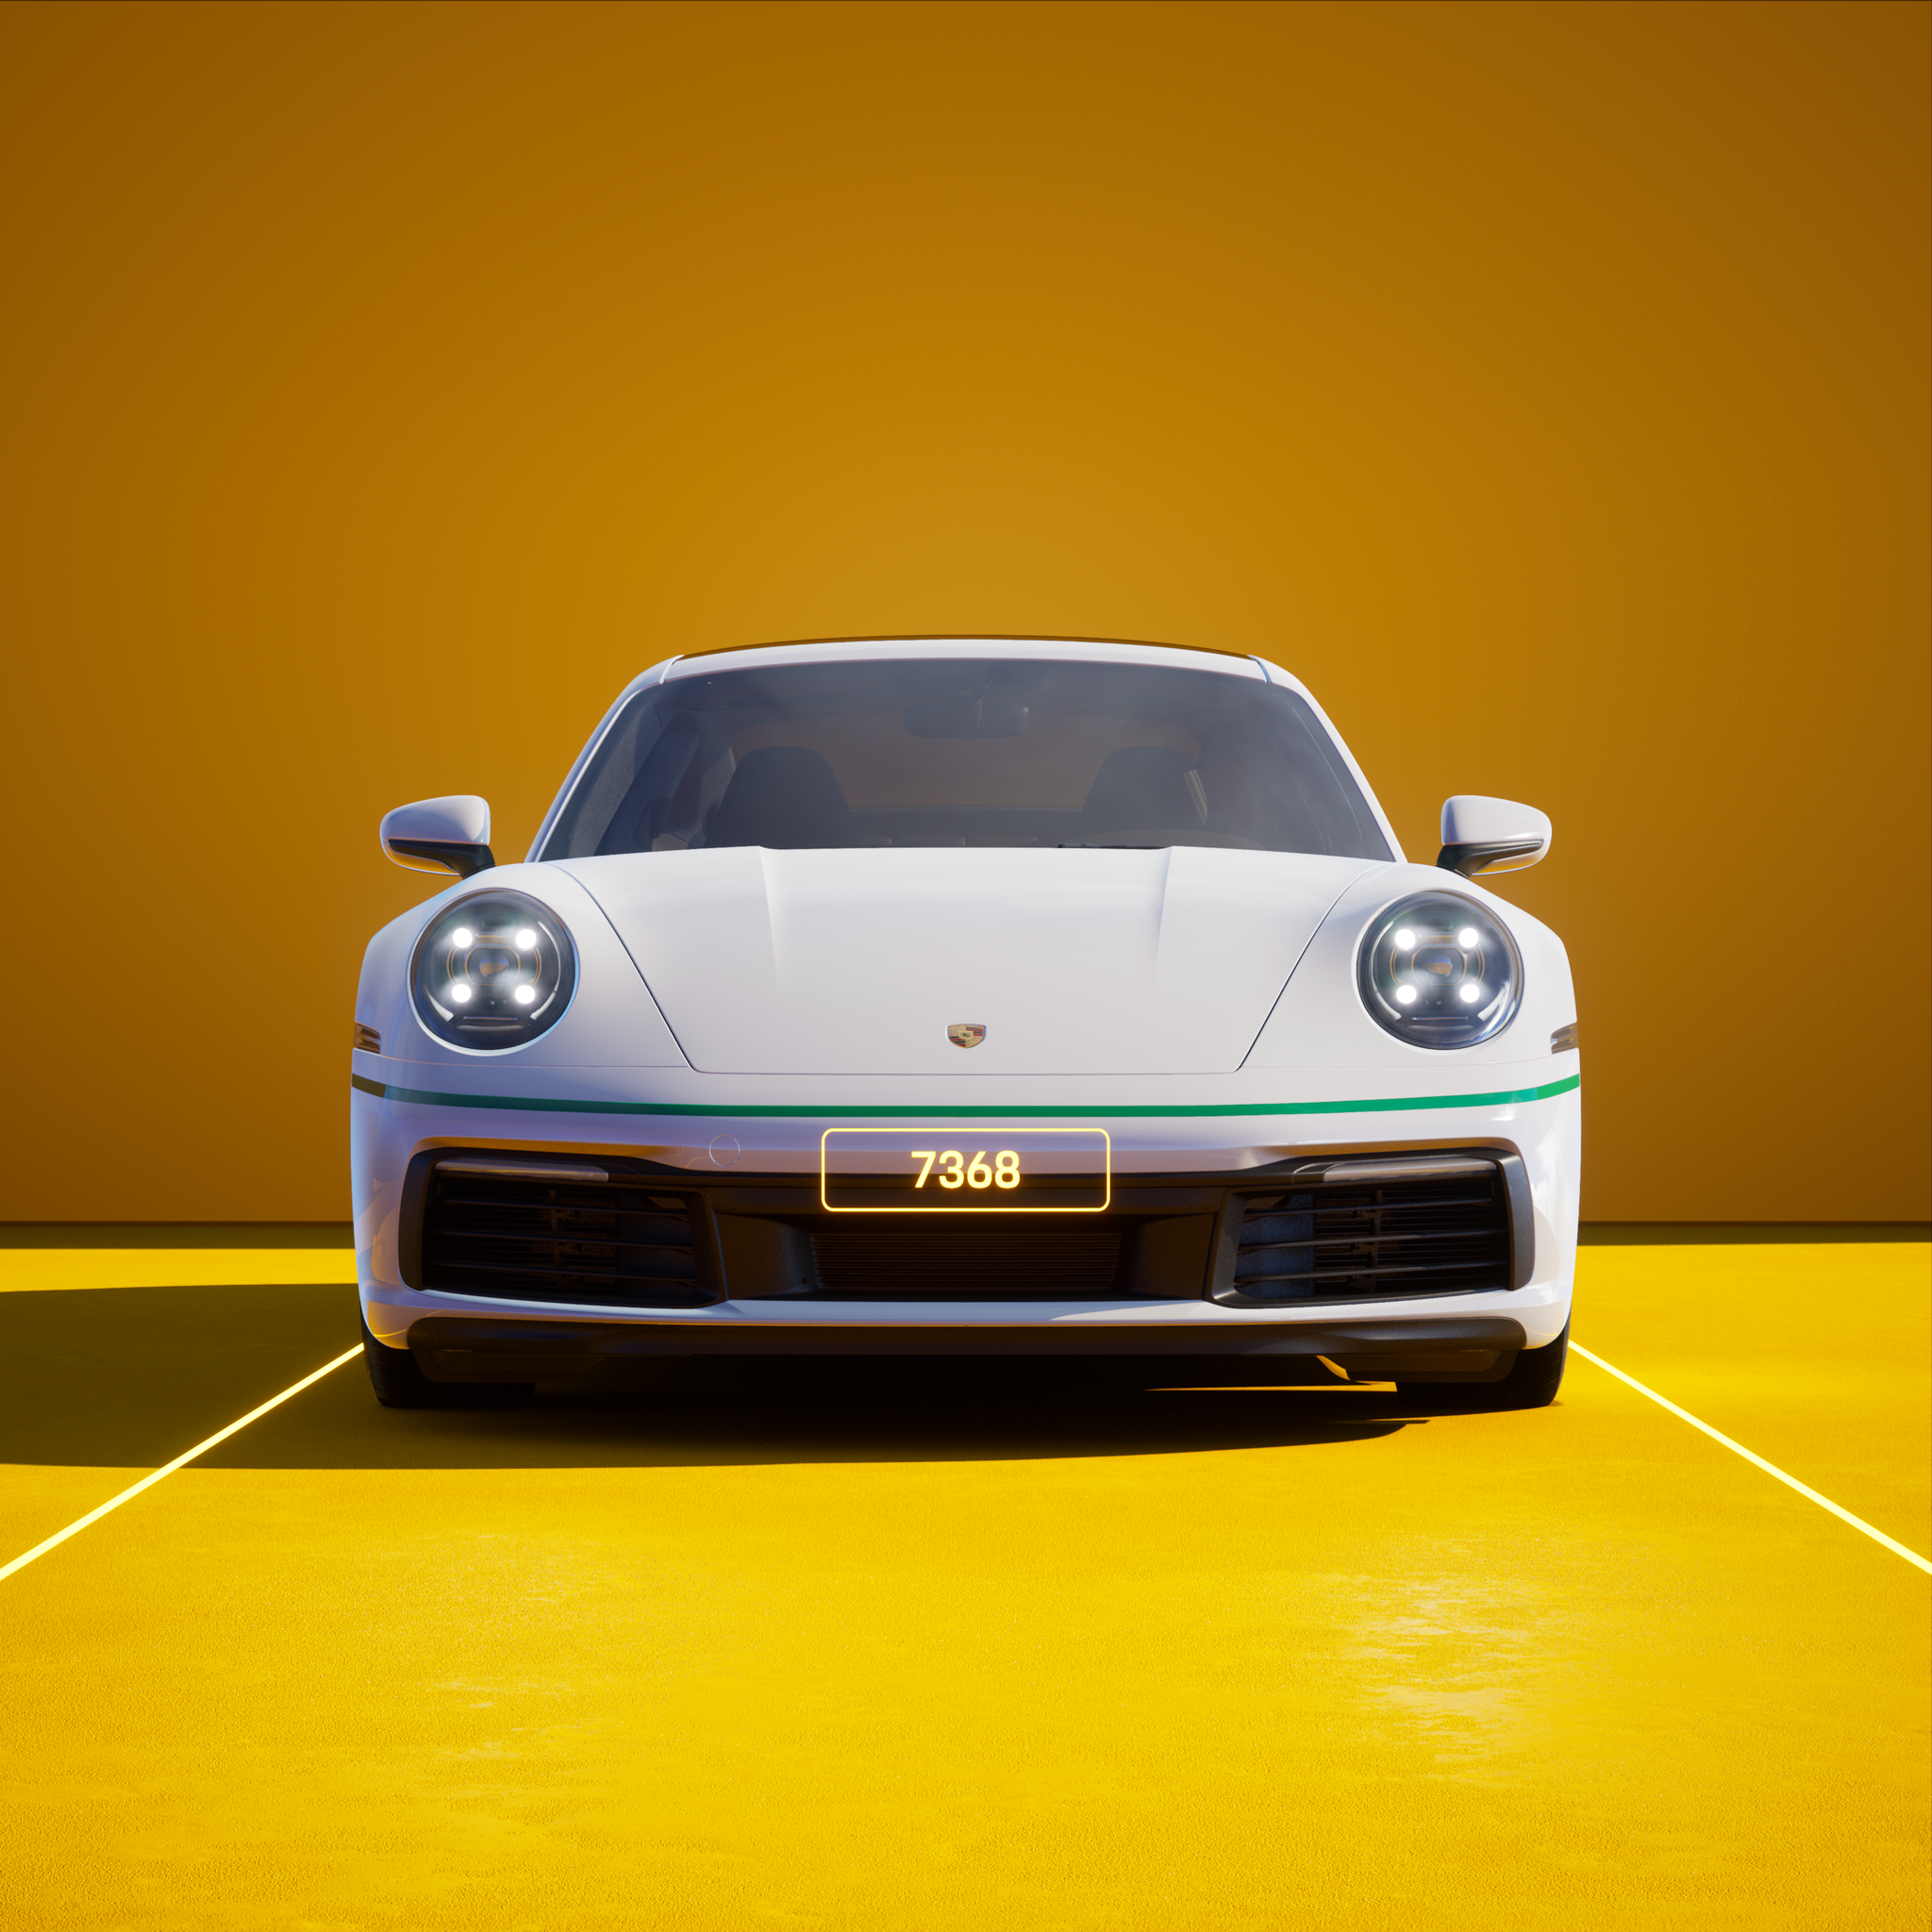 The PORSCHΞ 911 7368 image in phase